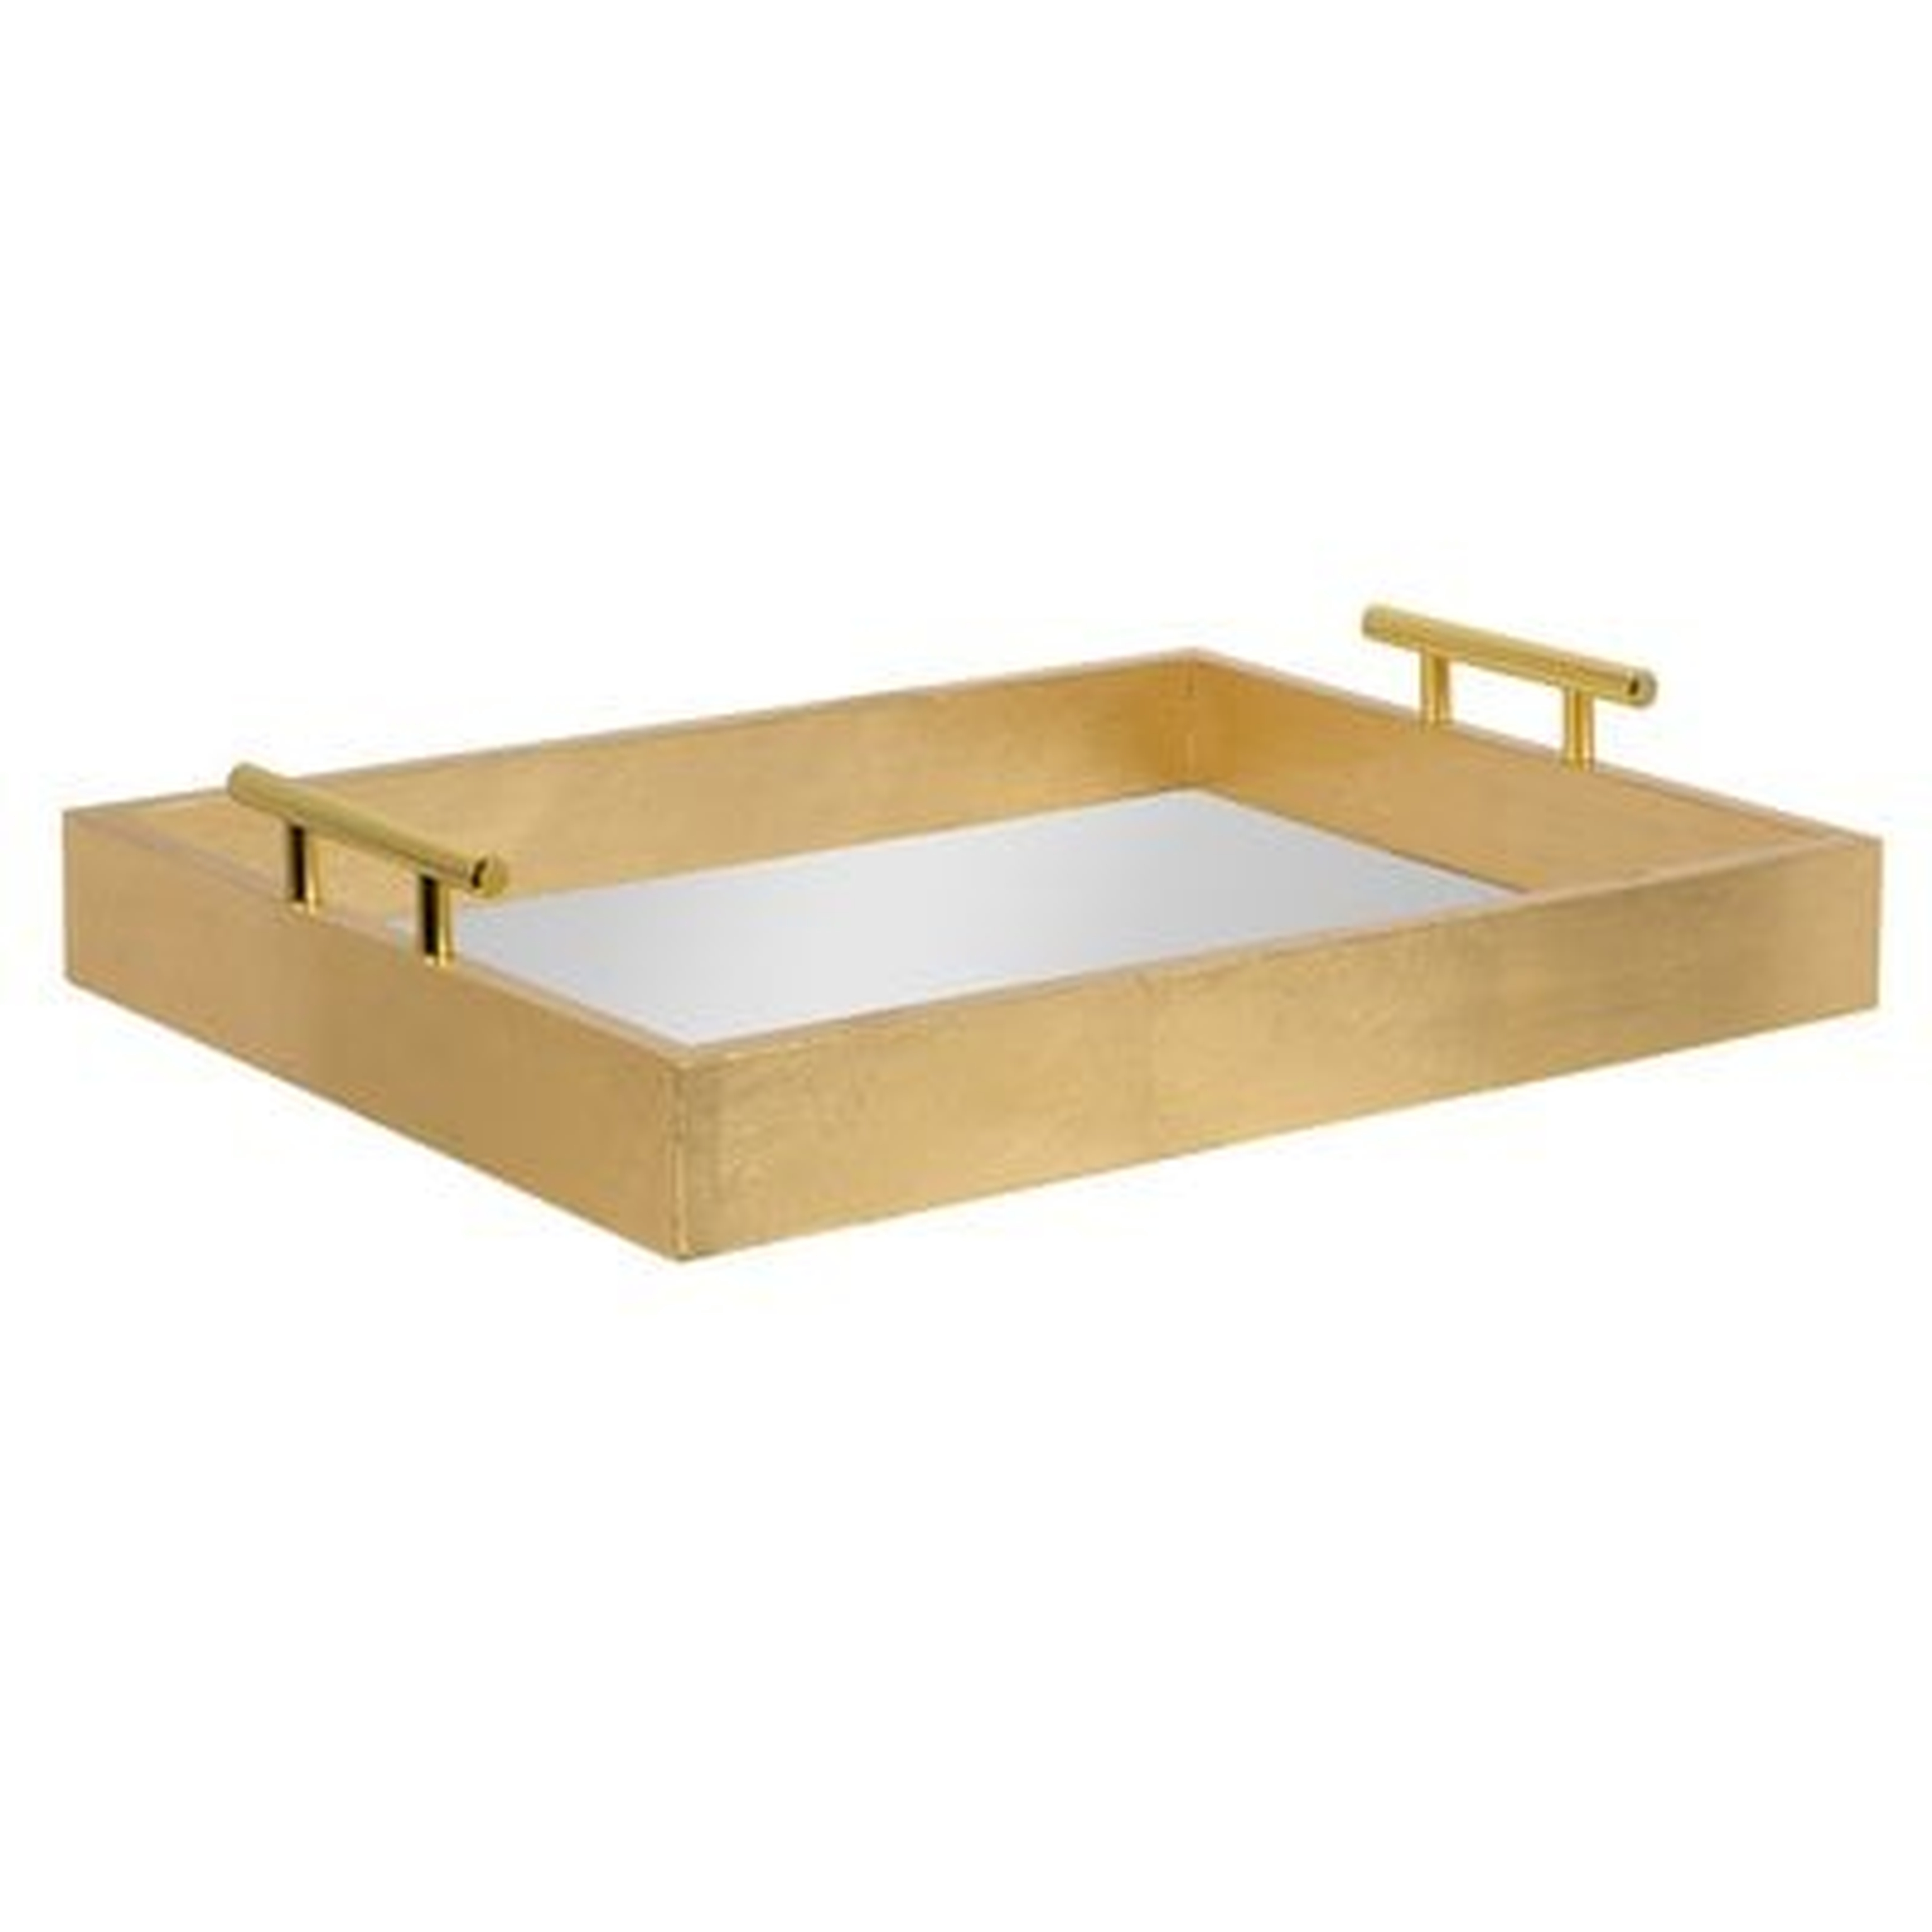 Lipton Decorative Serving Tray with Polished Metal Handles - AllModern